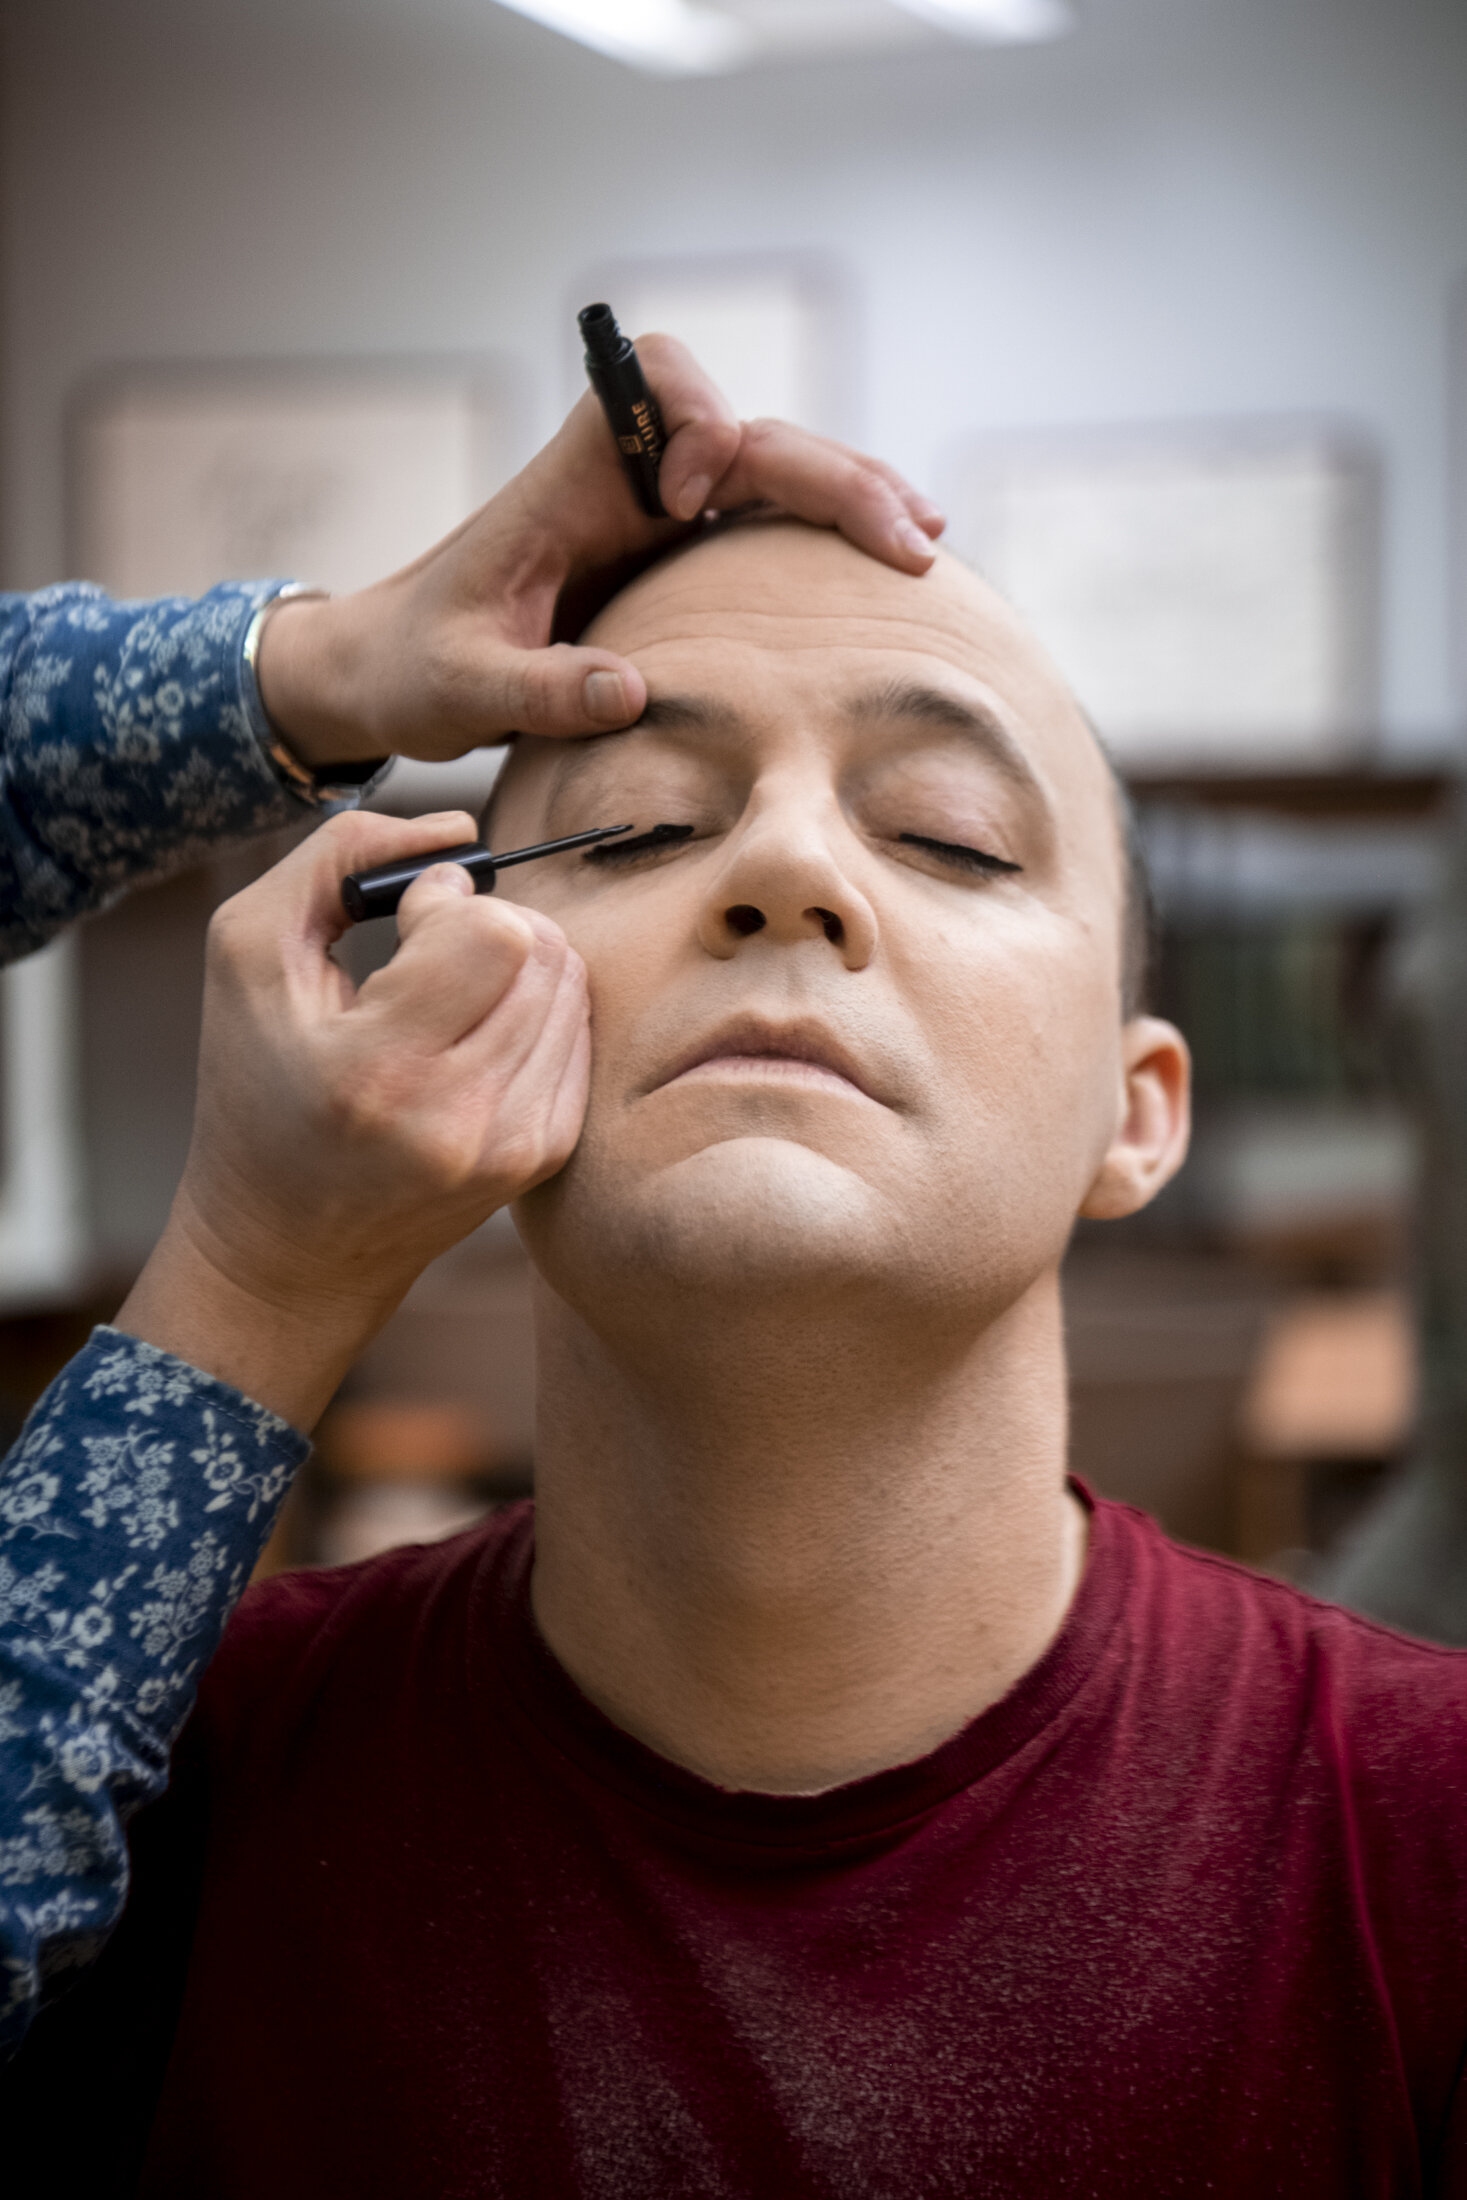  Brennan Buhl, an actor with Missoula Children’s Theater, puts the final touches on his makeup before a rehearsal, Jan. 14, 2020 in Missoula, Mont.      